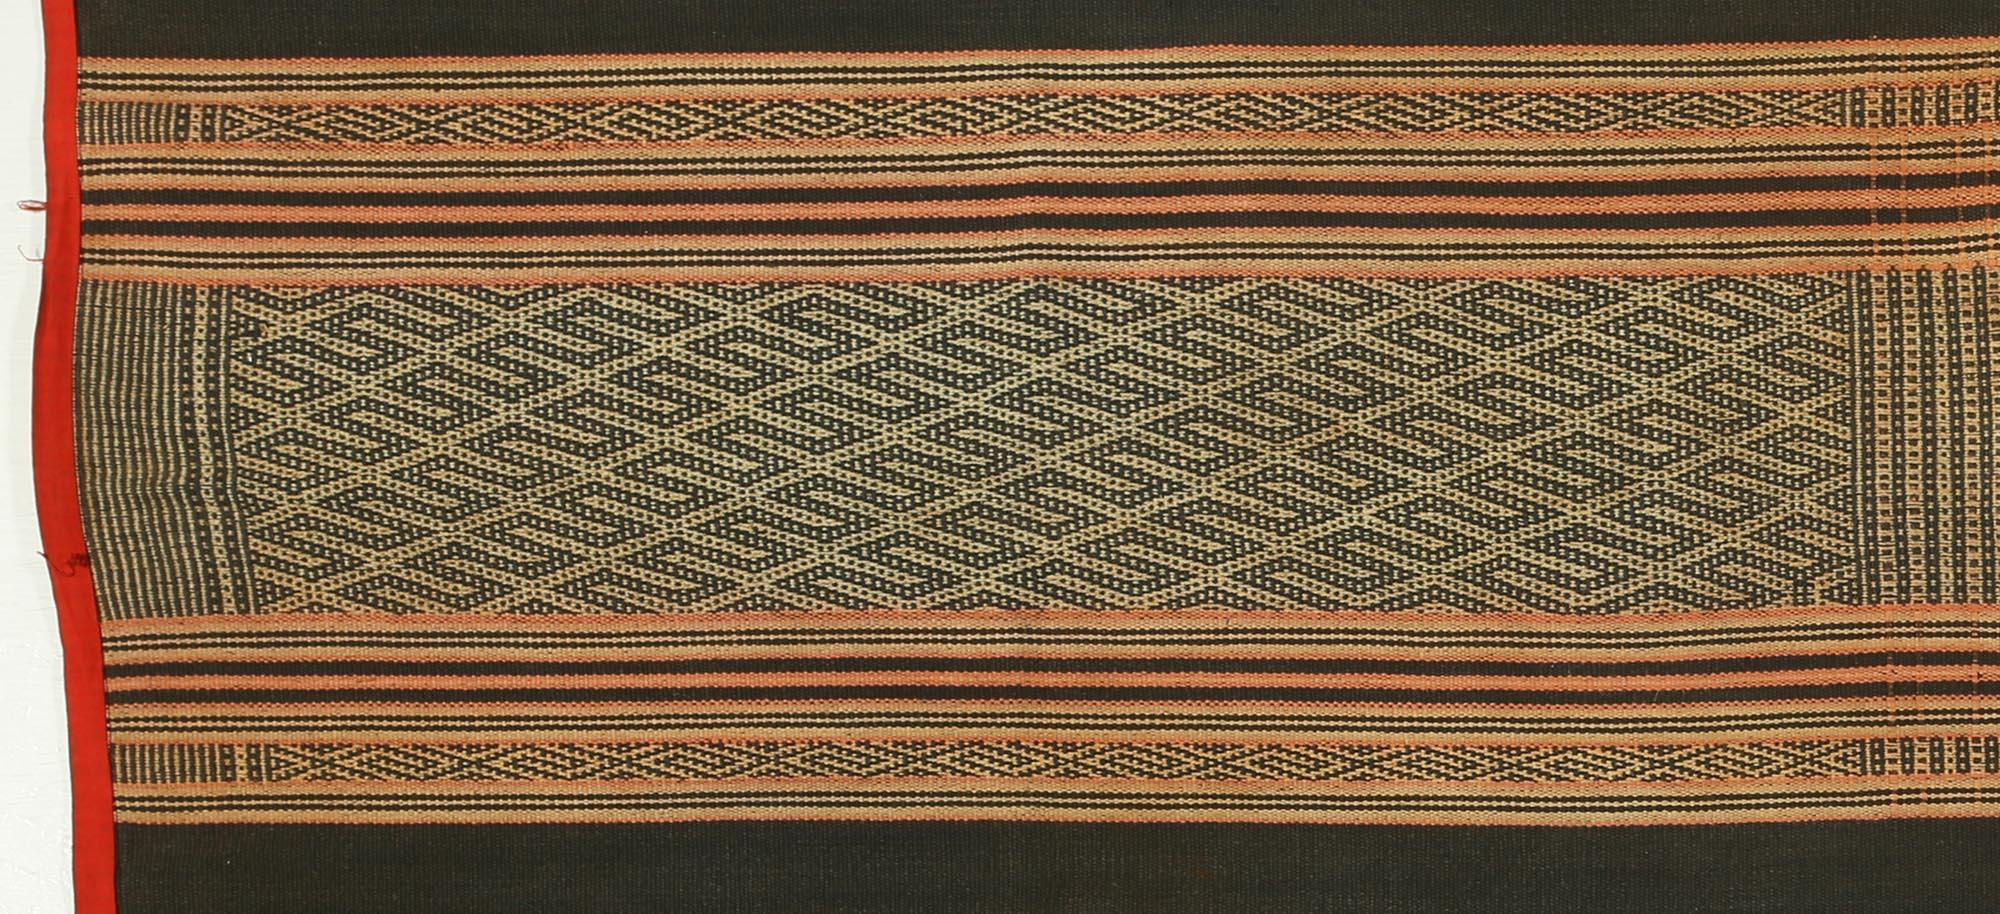 Early to mid-20th century handwoven cotton three-part skirt textile, central highlands, Vietnam.
Woven on a traditional back-strap loom by a woman of the Mnong people, Dec Lac Province, Central Highlands of Vietnam. Wonderful asymmetrical geometric